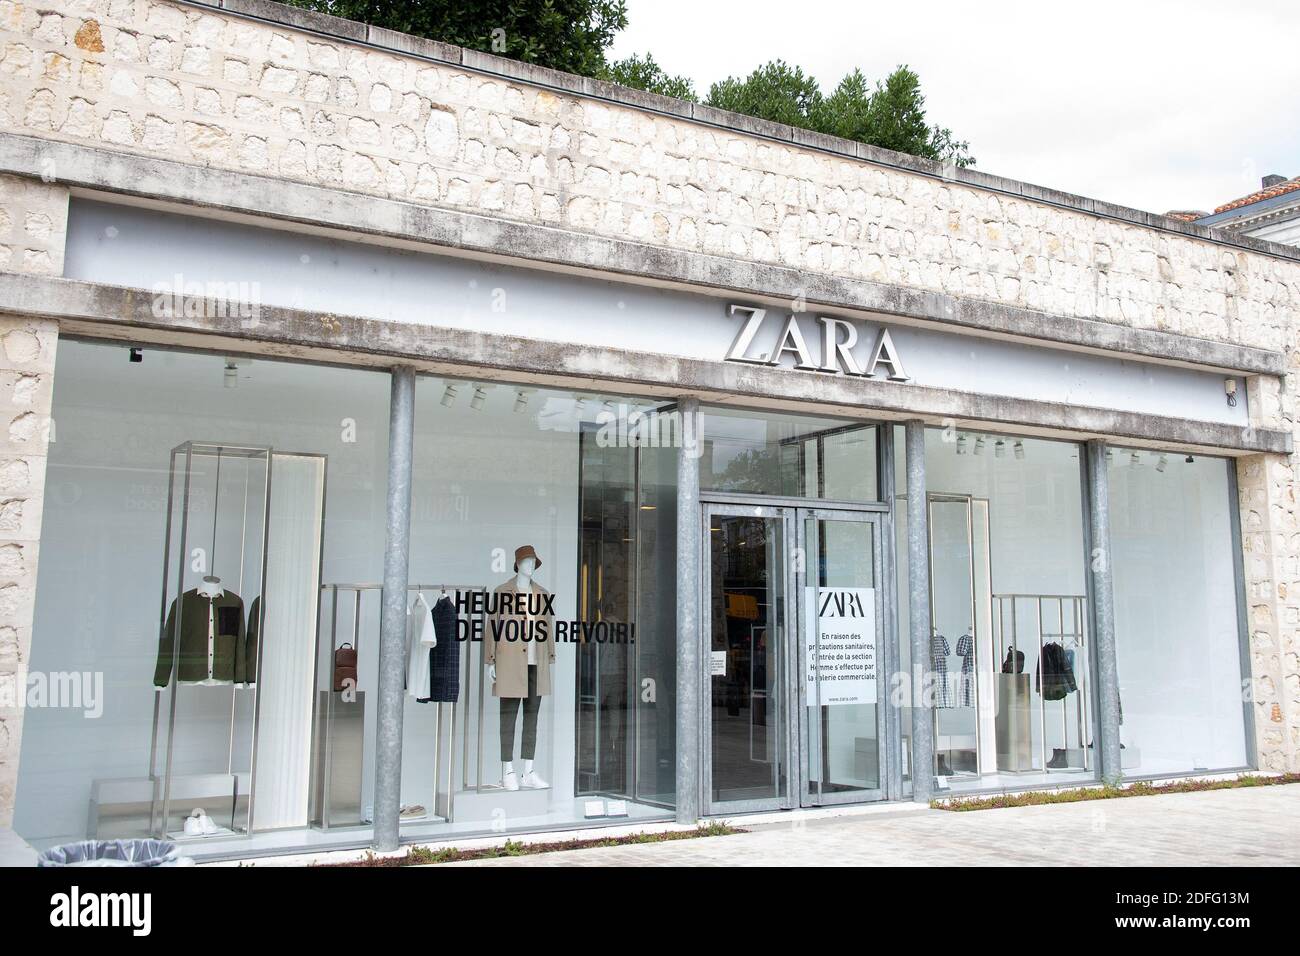 A shop sign of ZARA, on August 28 2020 in Angouleme, France. Photo by David  Niviere/ABACAPRESS.COM Stock Photo - Alamy